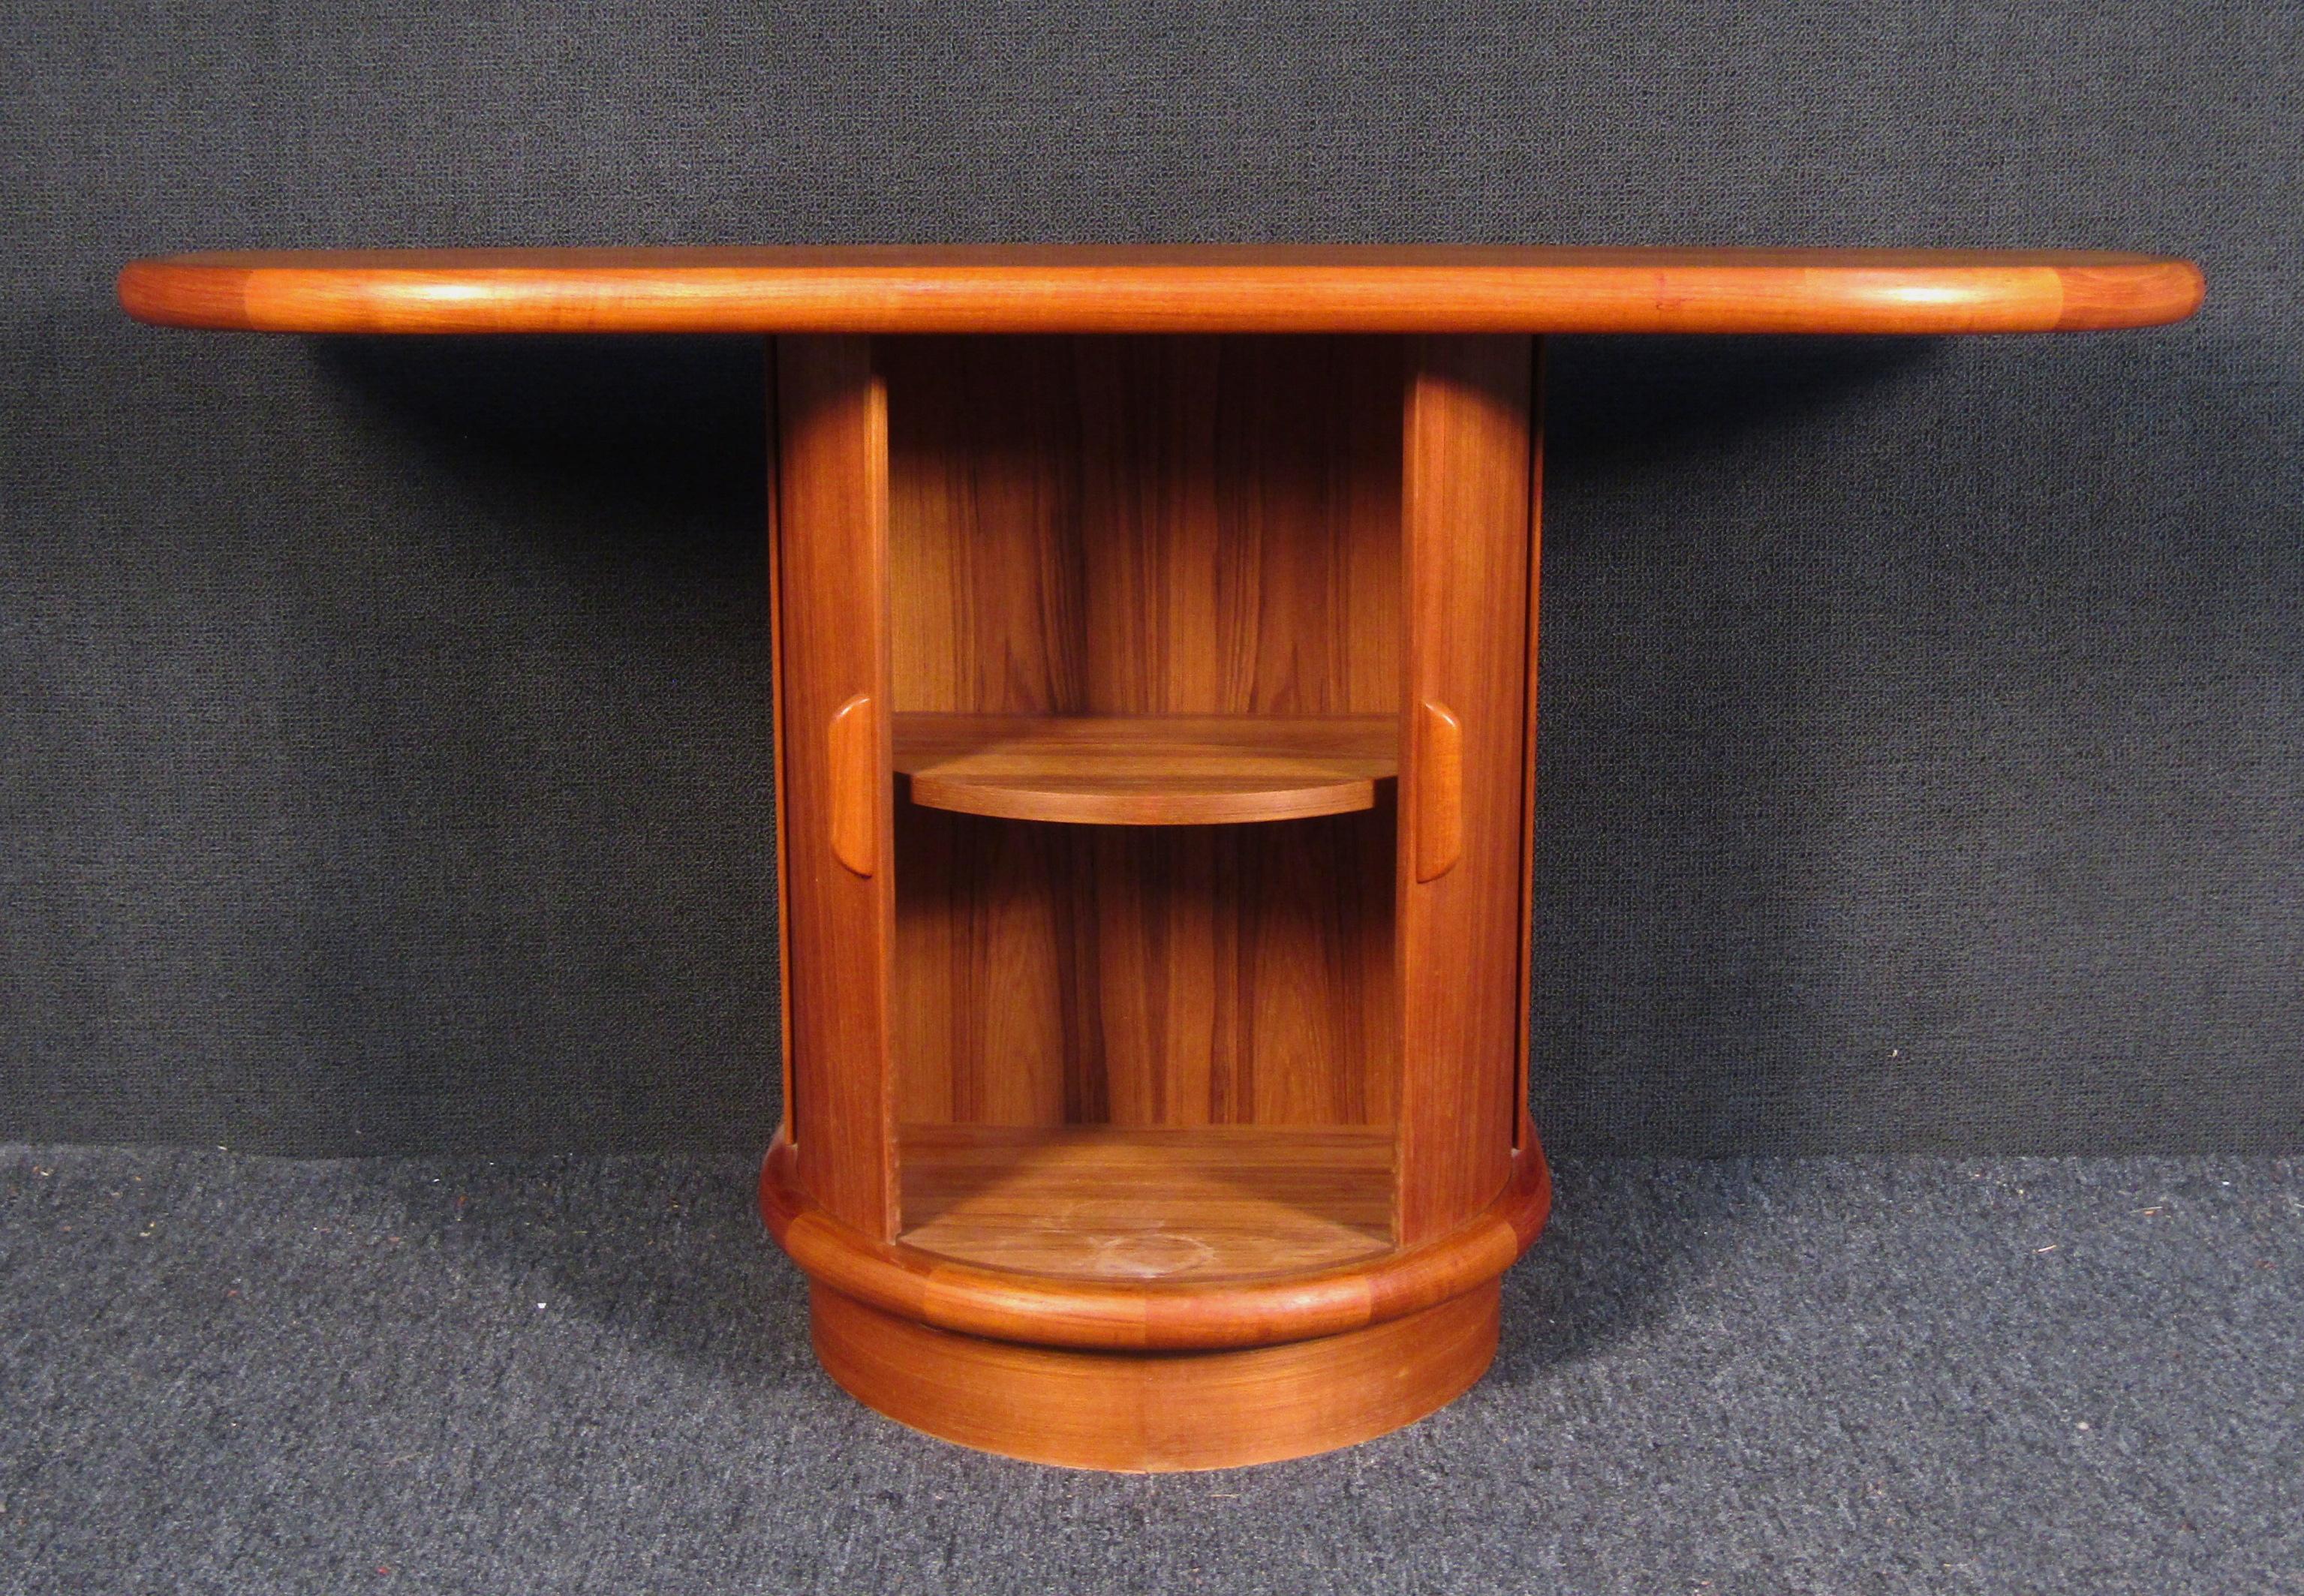 Stunning vintage modern teakwood console table with rounded edges. This table features two curved sliding pocket doors. Quality craftsmanship with elegant teak wood grain throughout that looks great behind the sofa or in the hallway.

Please